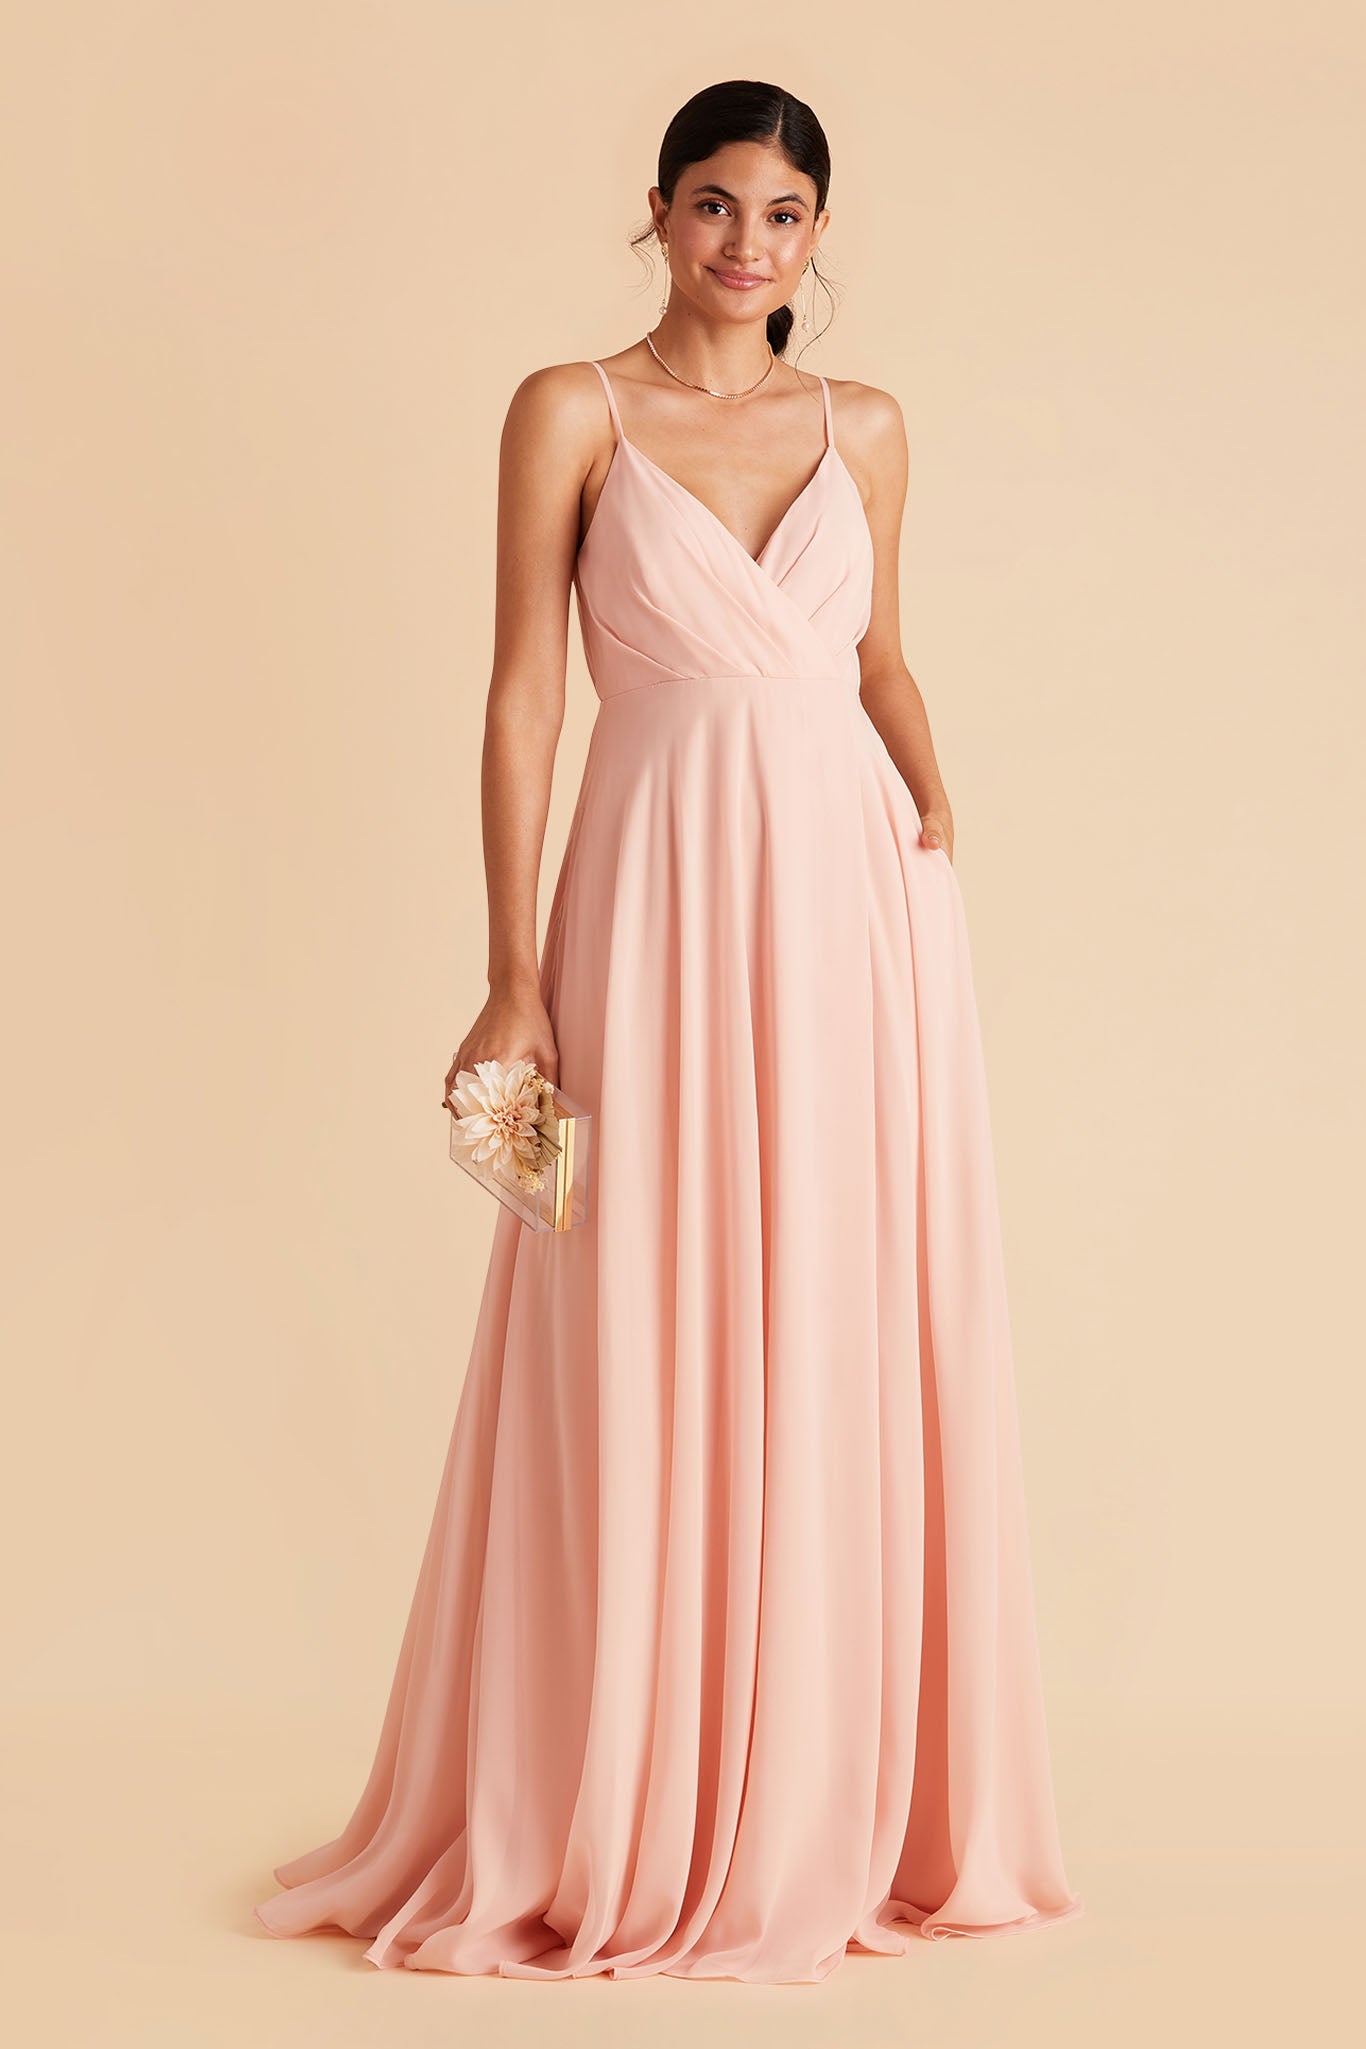 Kaia bridesmaids dress in blush pink chiffon by Birdy Grey, front view